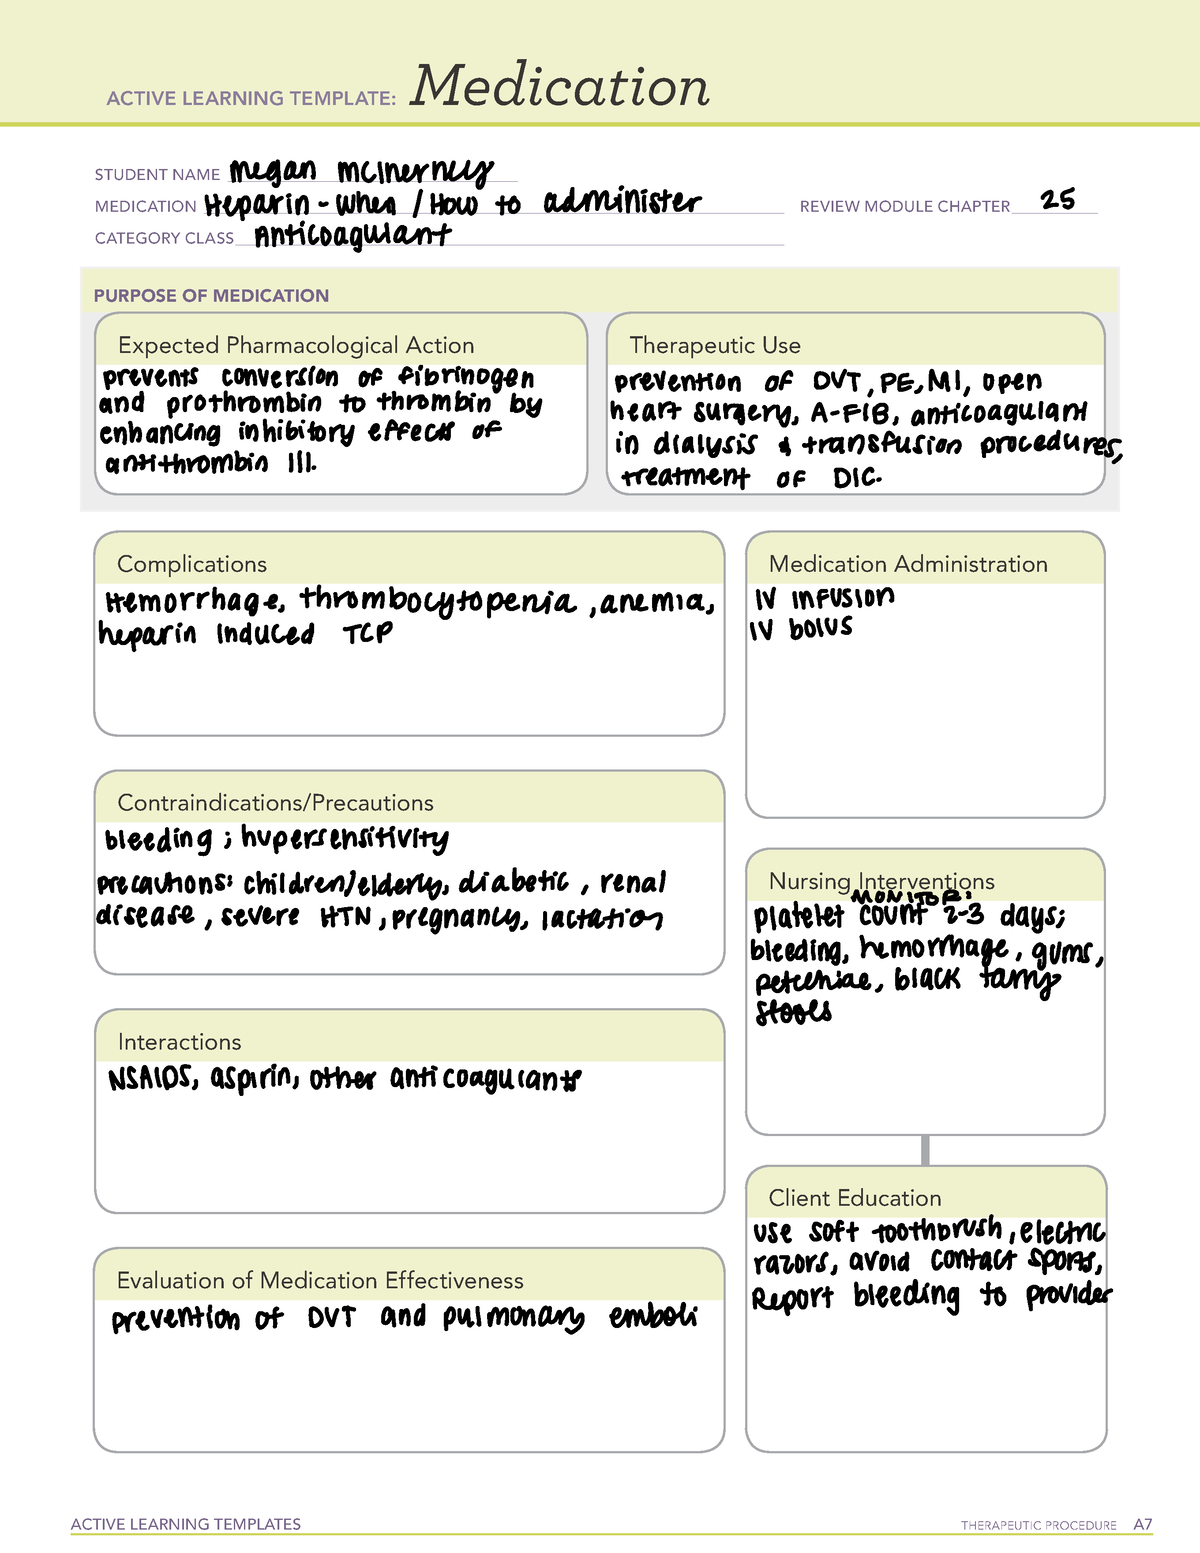 heparin-med-active-learning-templates-therapeutic-procedure-a